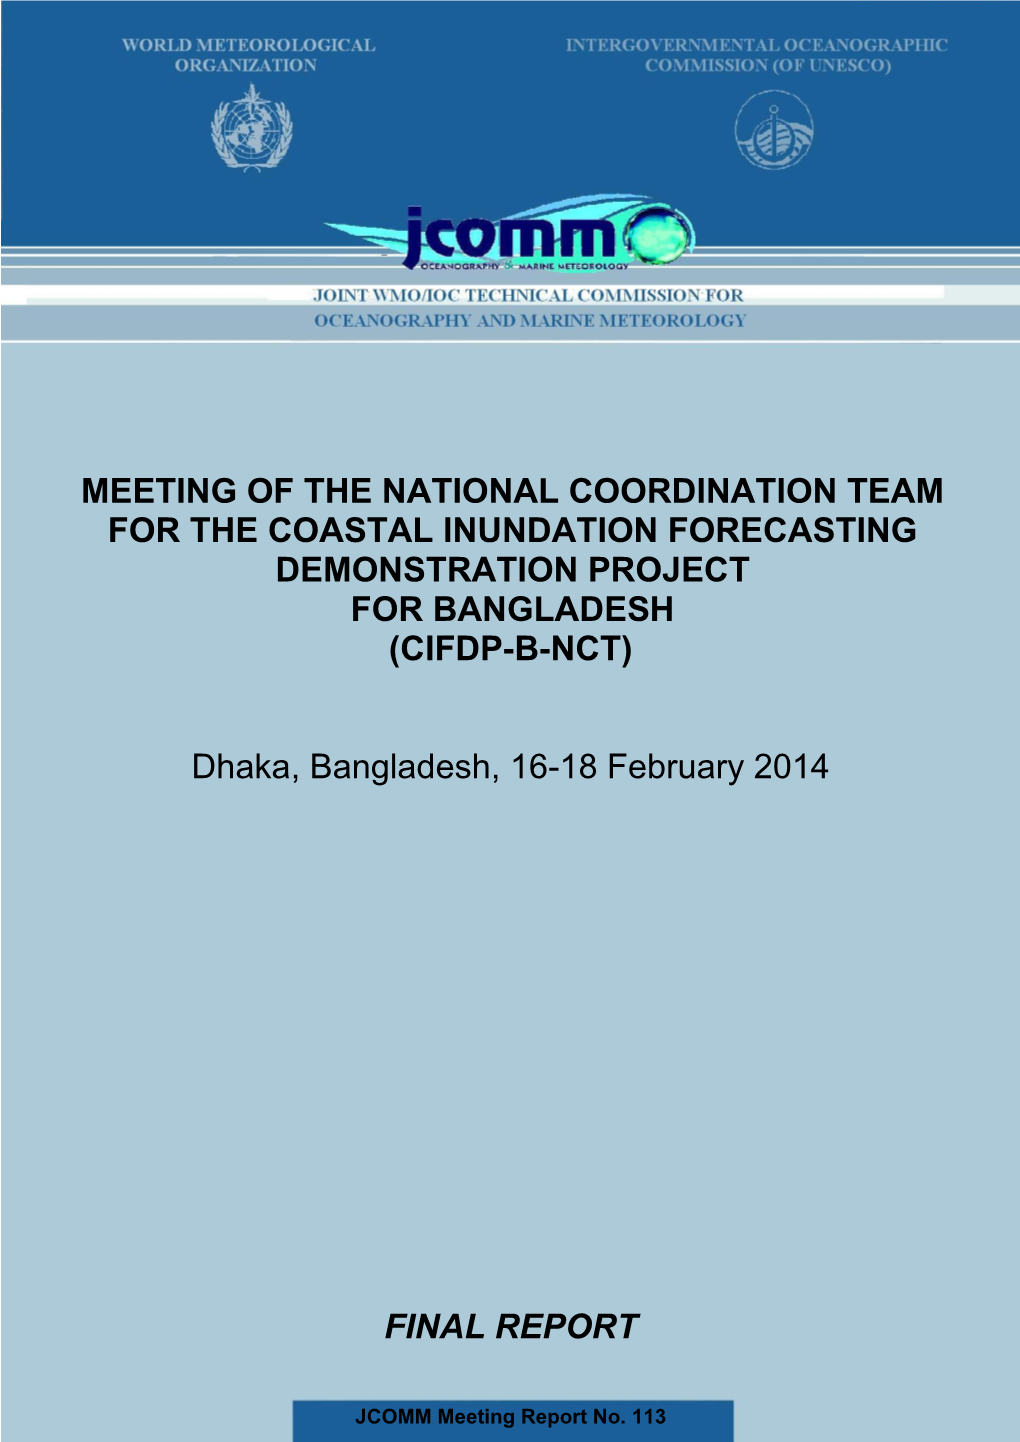 Meeting of the National Coordination Team for the Coastal Inundation Forecasting Demonstration Project for Bangladesh (Cifdp-B-Nct)